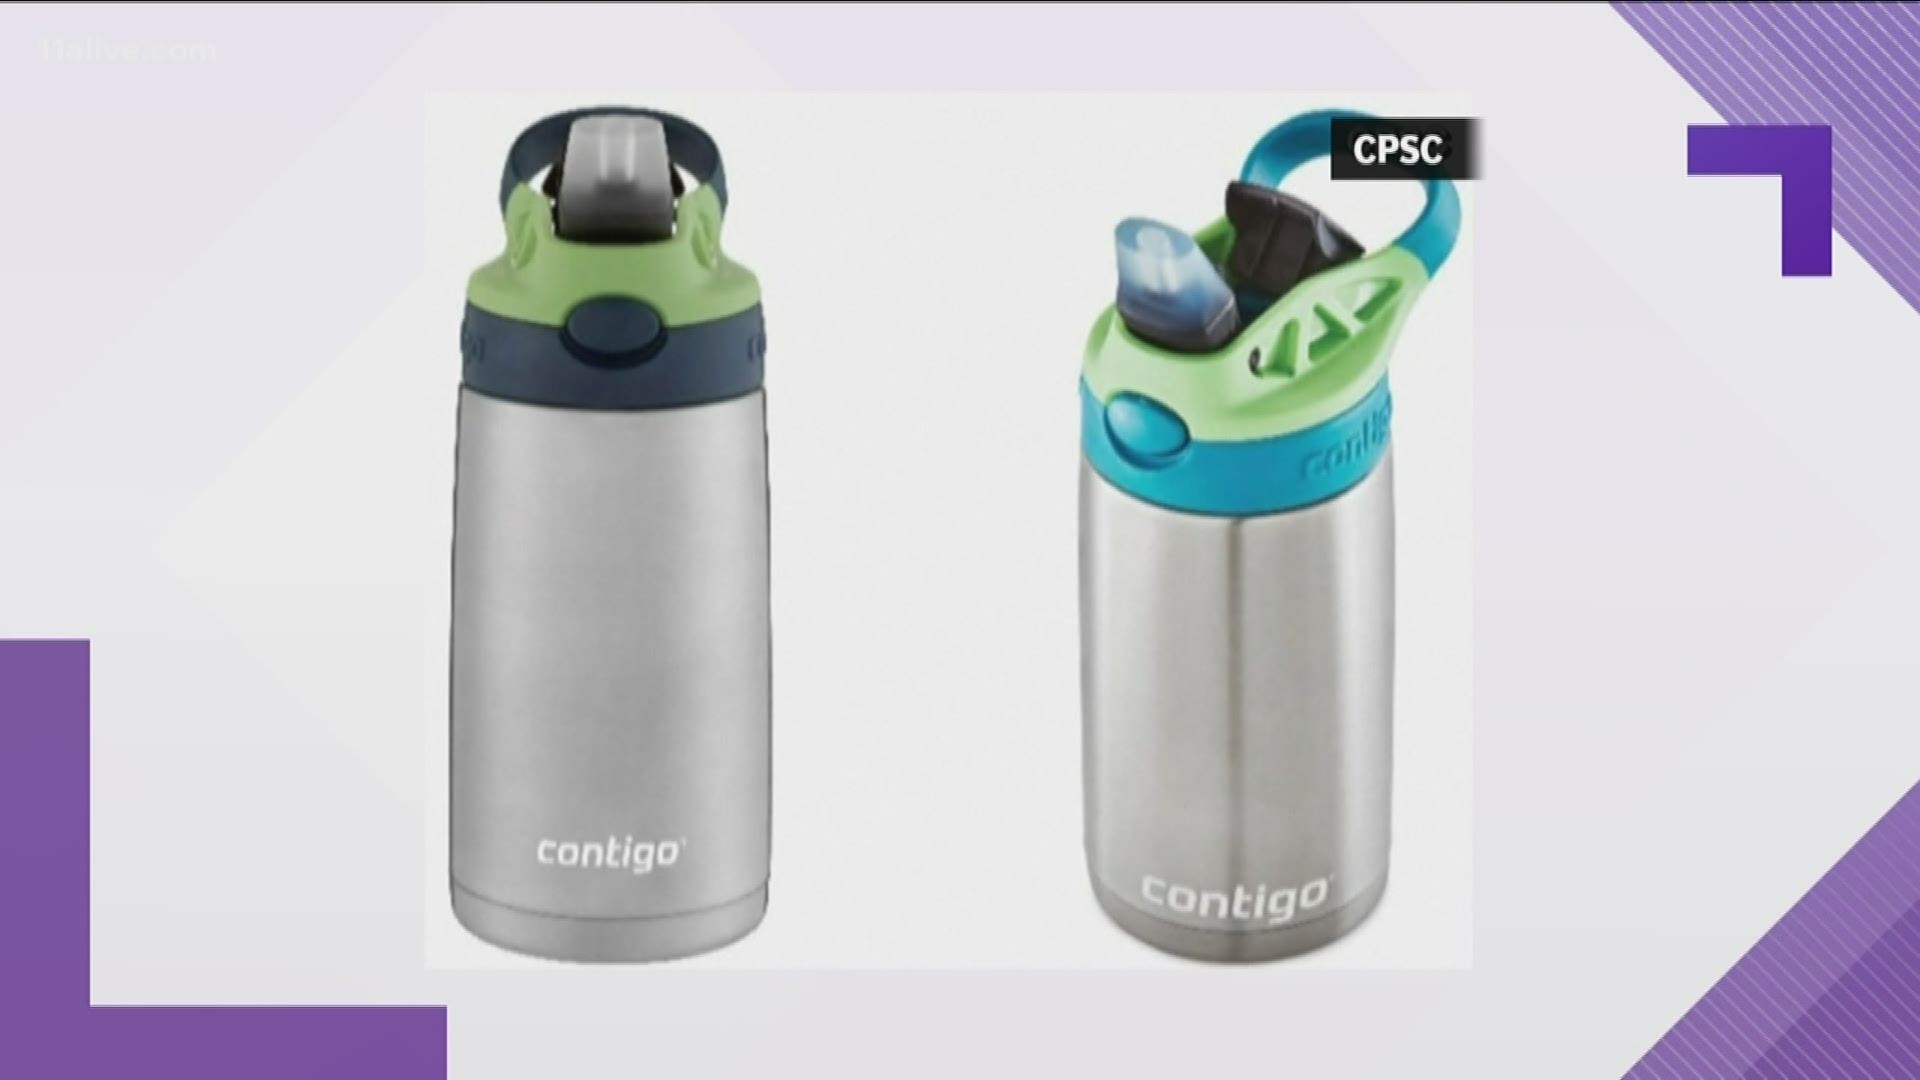 The bottles are being recalled due to a choking hazard where the clear silicone spout can detach.